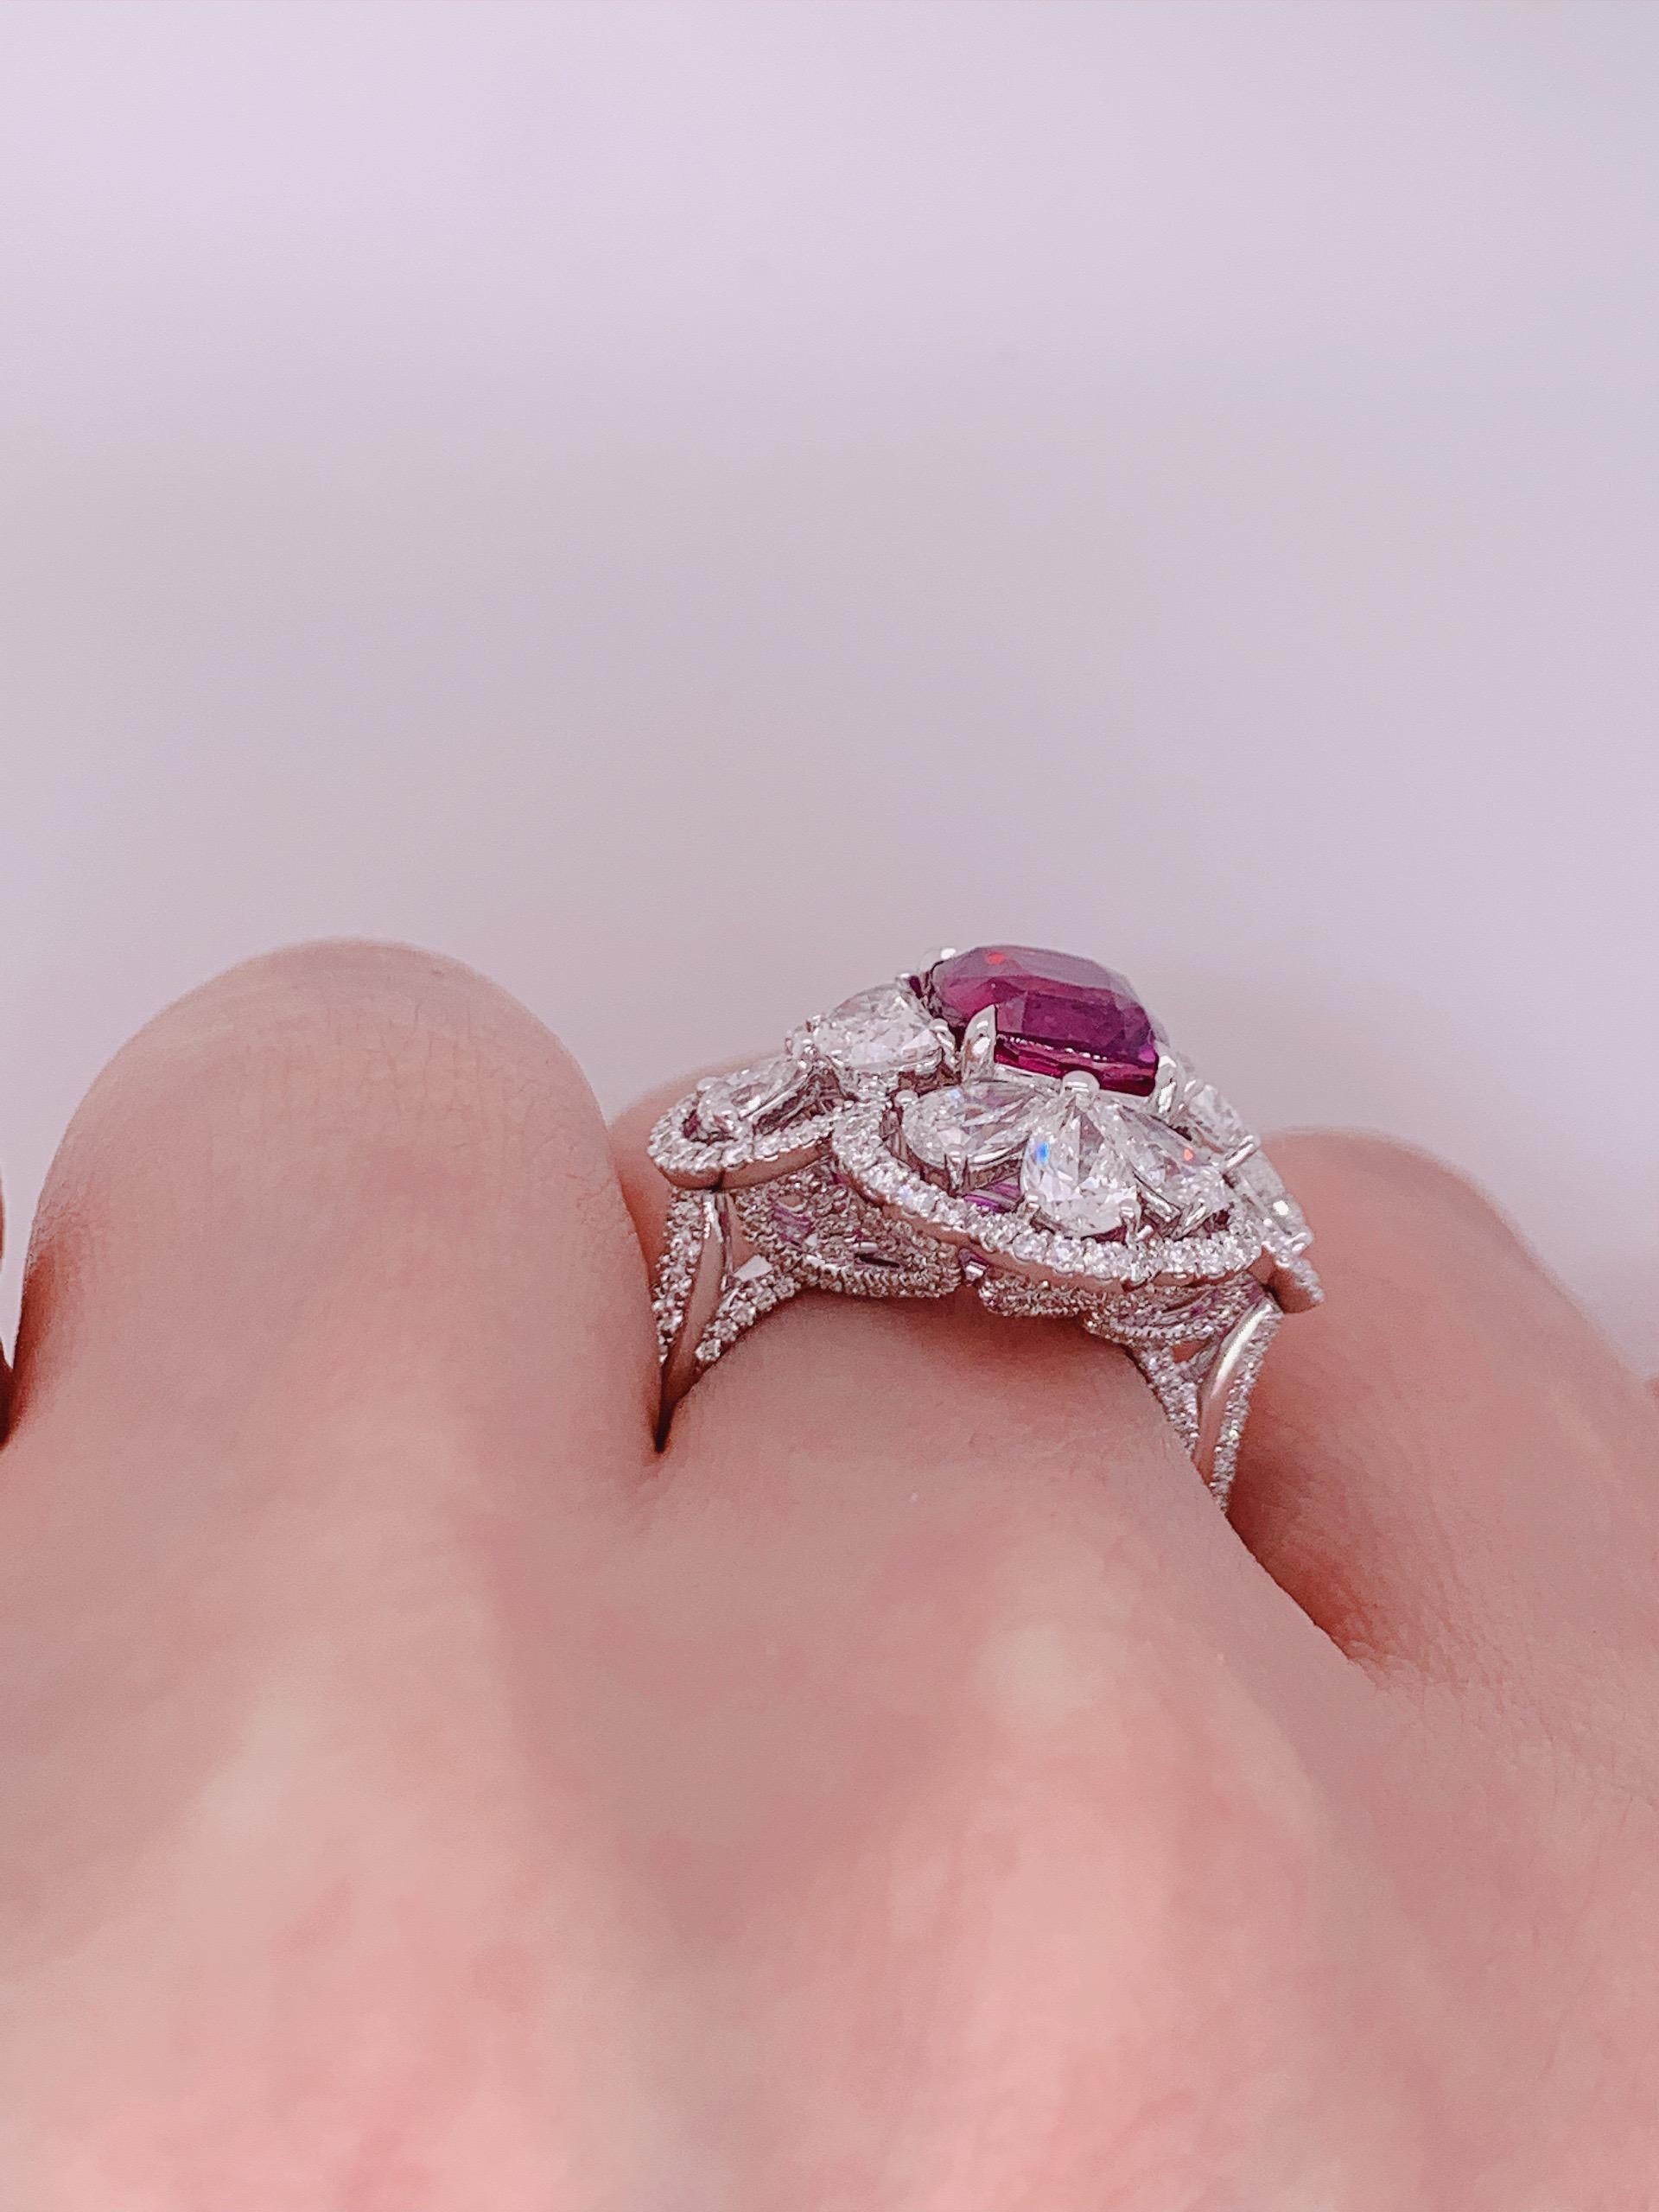 Cushion Cut KAHN GRS Certified 3.11 Carat Unheated Pink Sapphire Ring For Sale